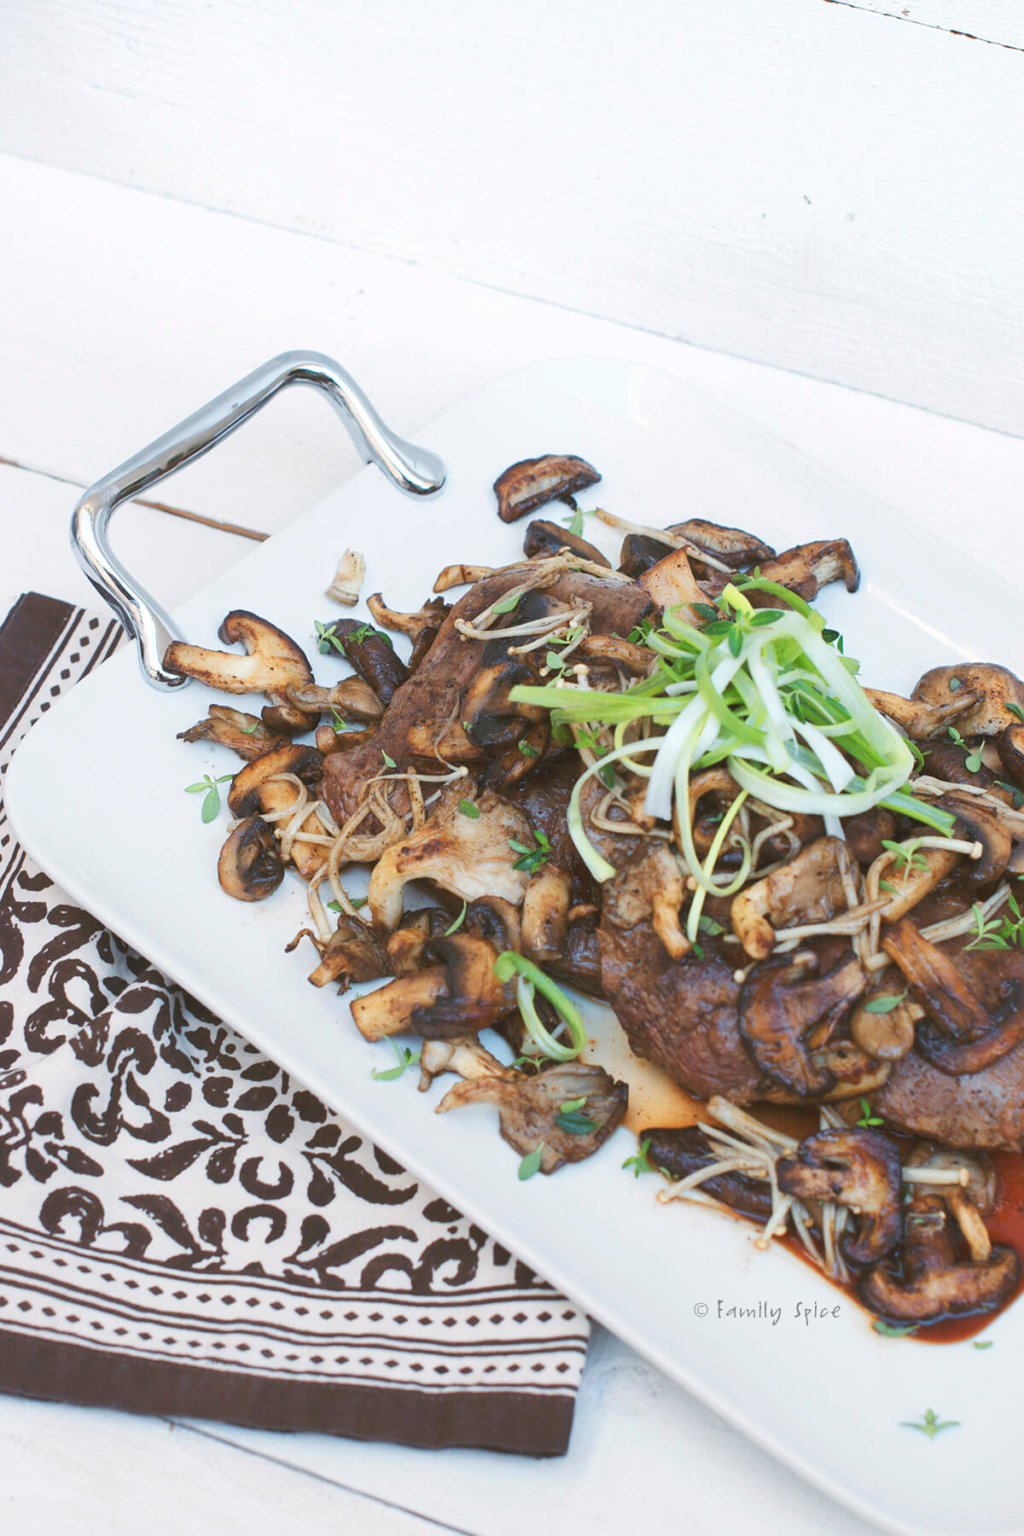 Grilled Flank Steak with Garlic and Wild Mushrooms - Family Spice